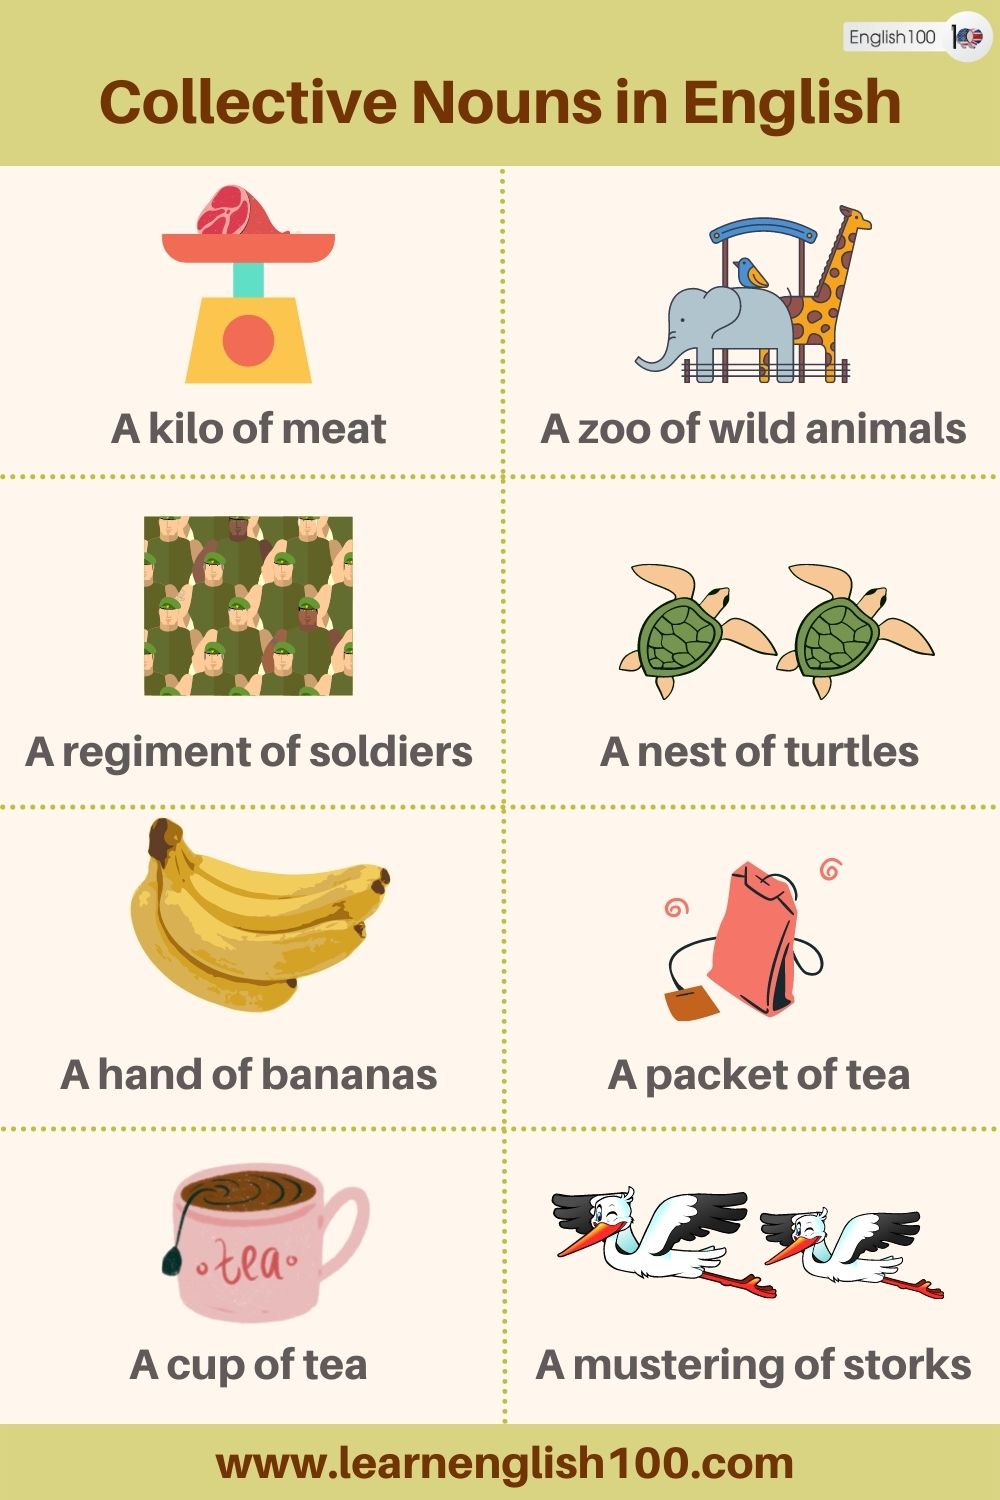 Collective Nouns in English